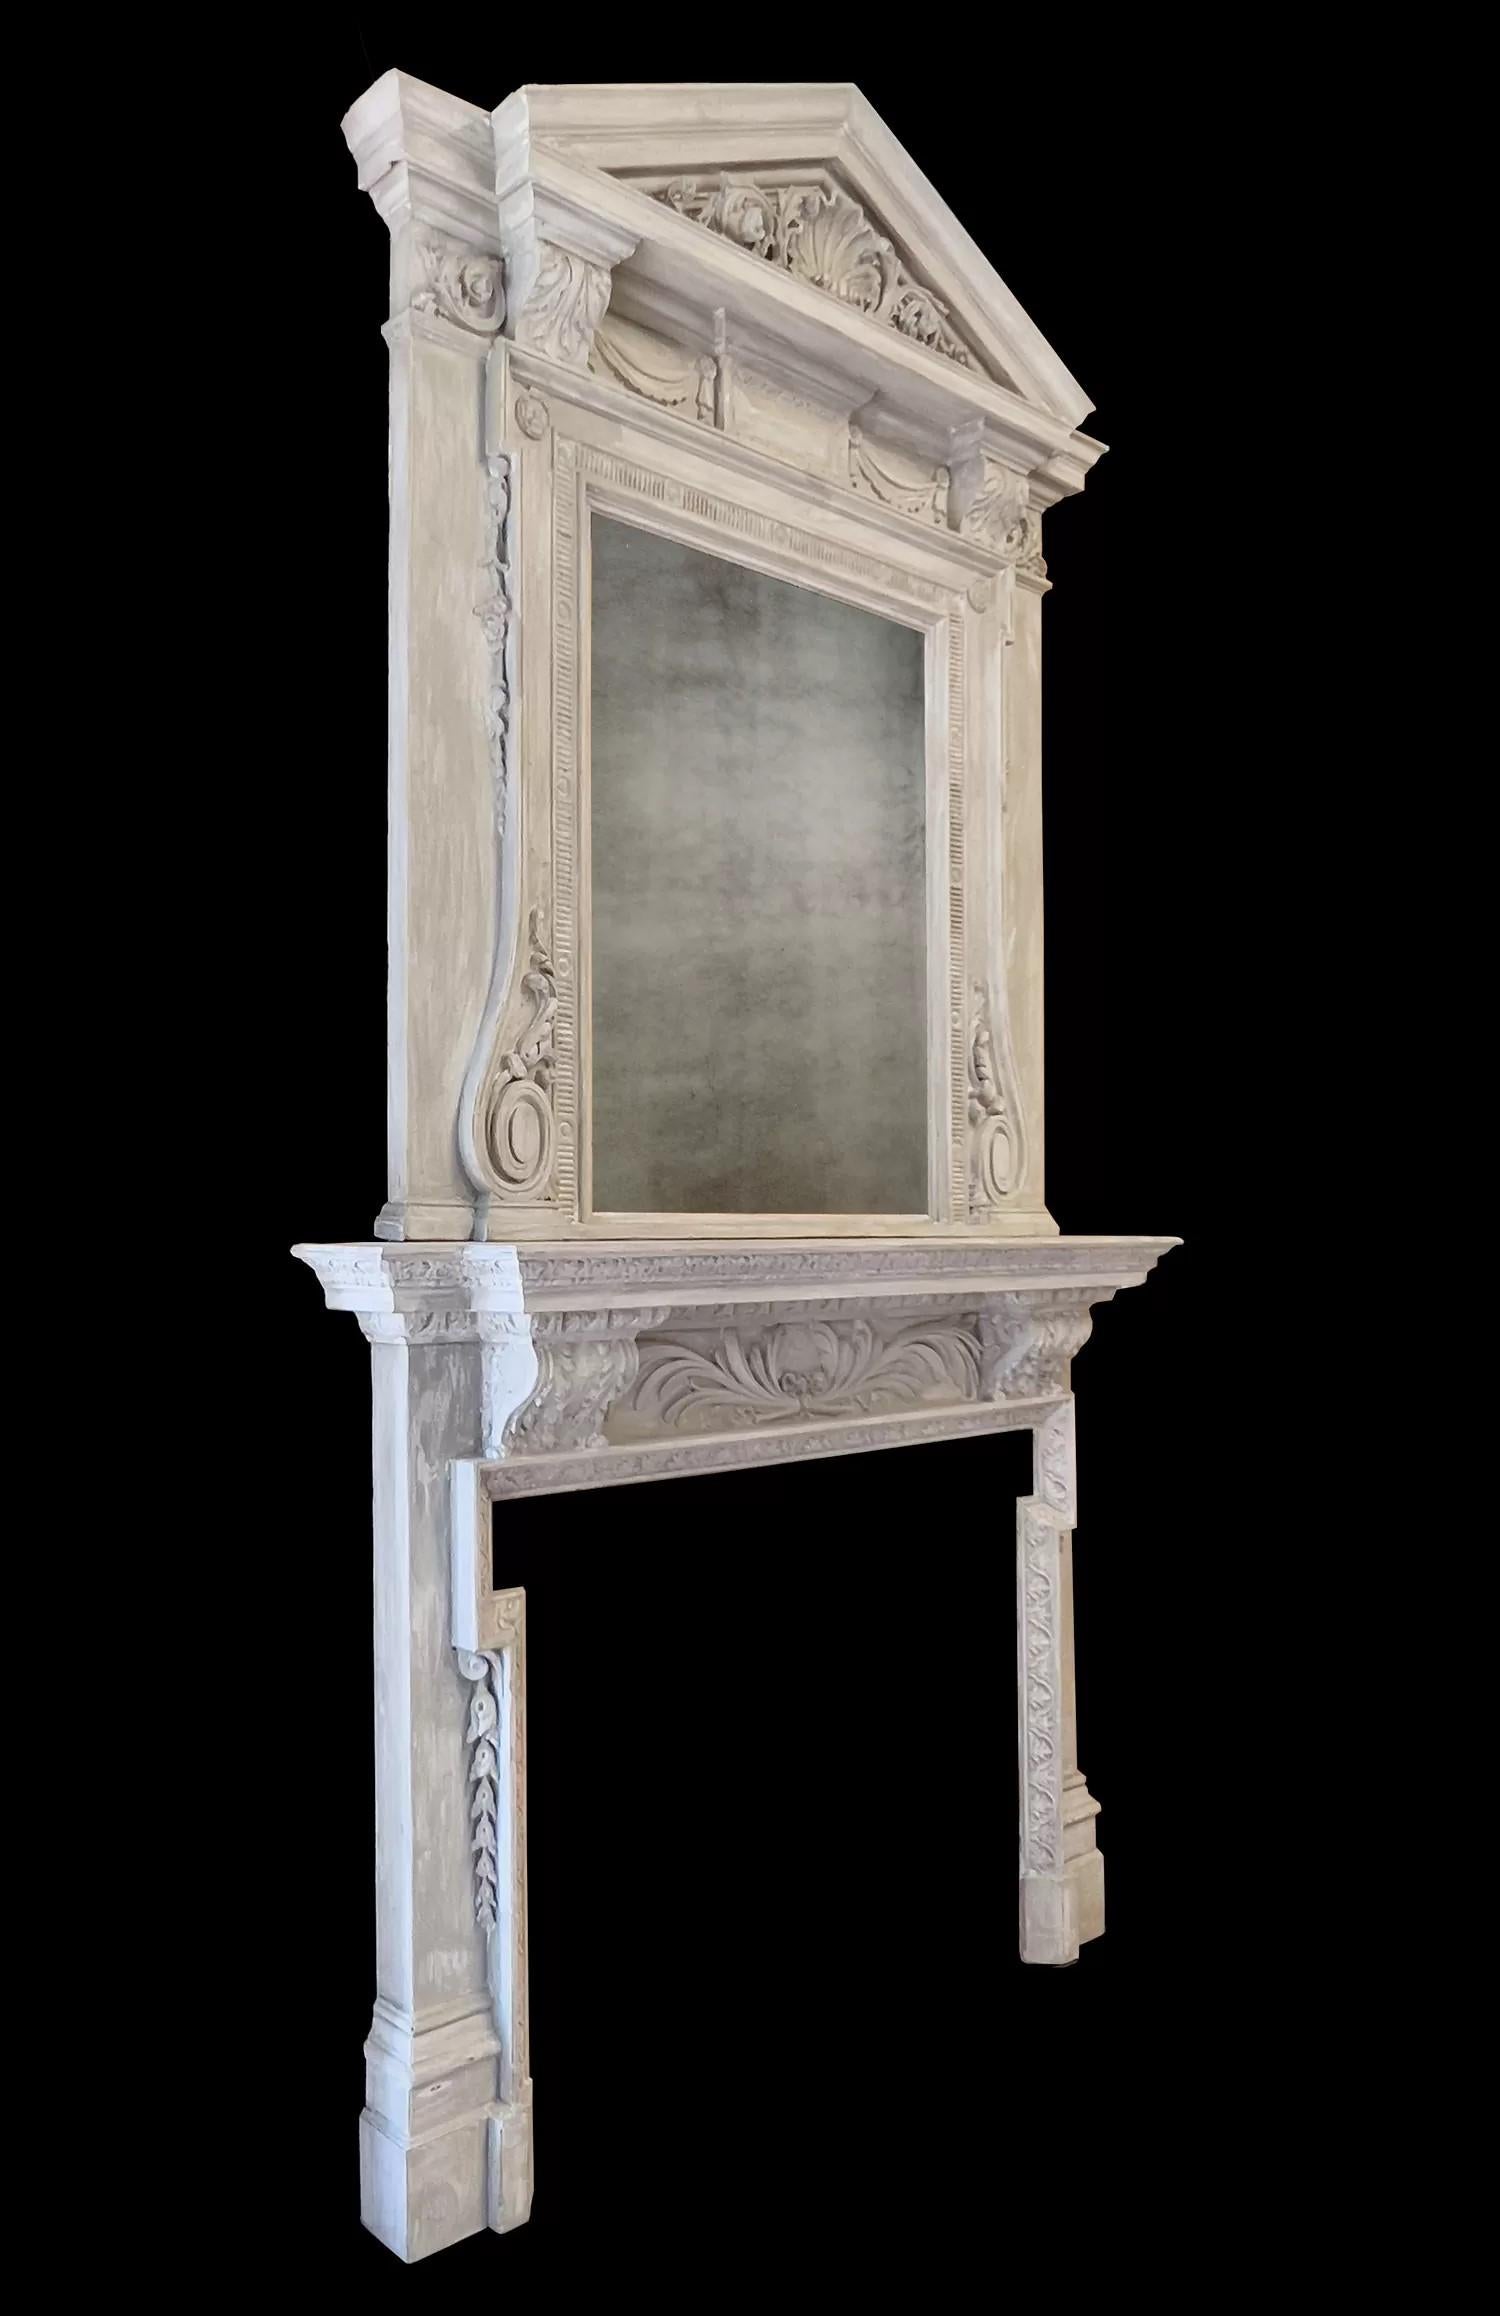 Hand-Painted A large antique painted wooden fireplace with overmantel mirror For Sale